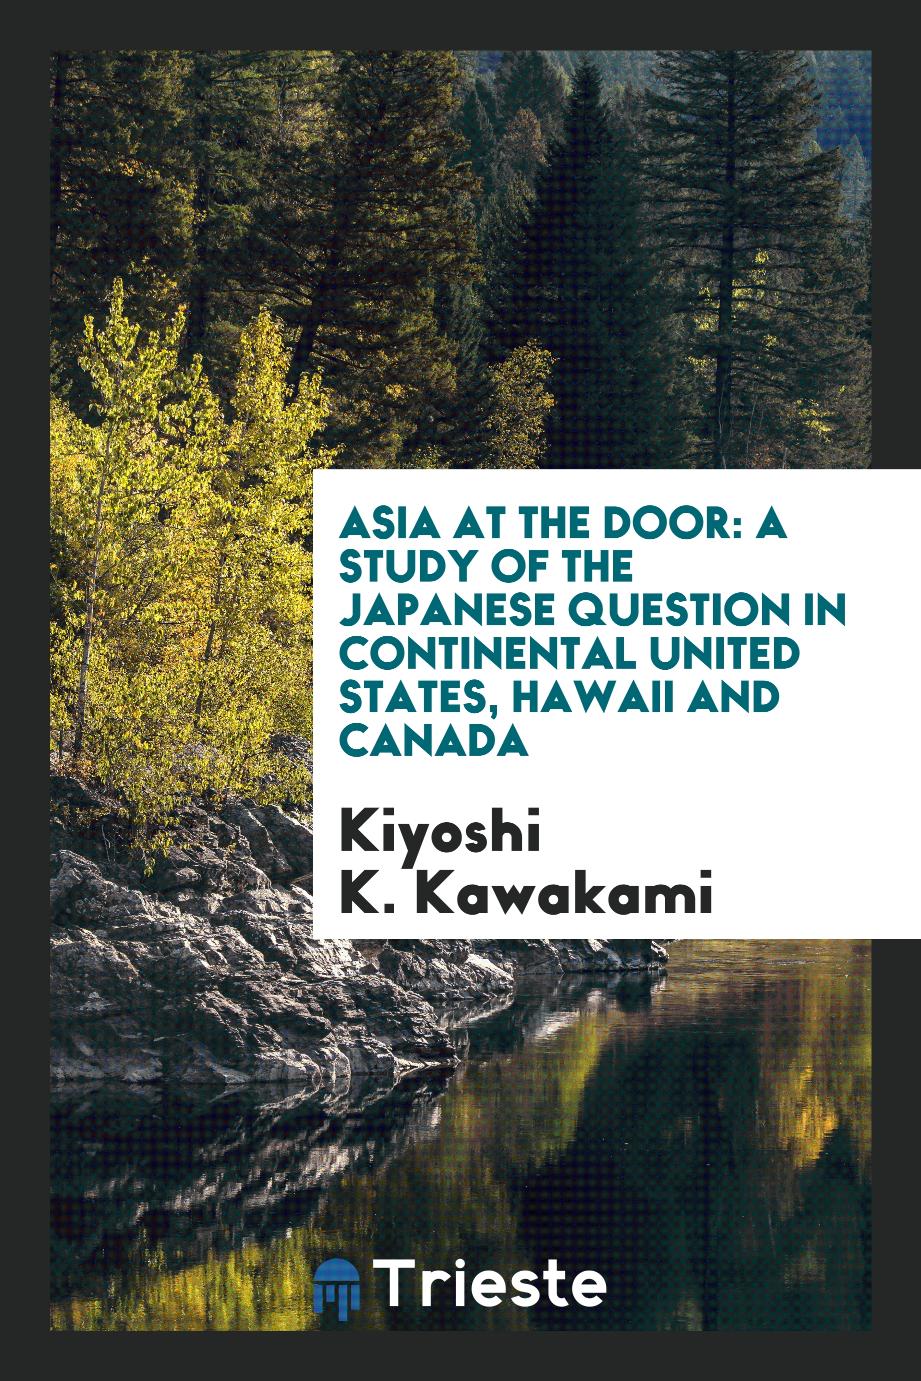 Asia at the door: a study of the Japanese question in continental United States, Hawaii and Canada